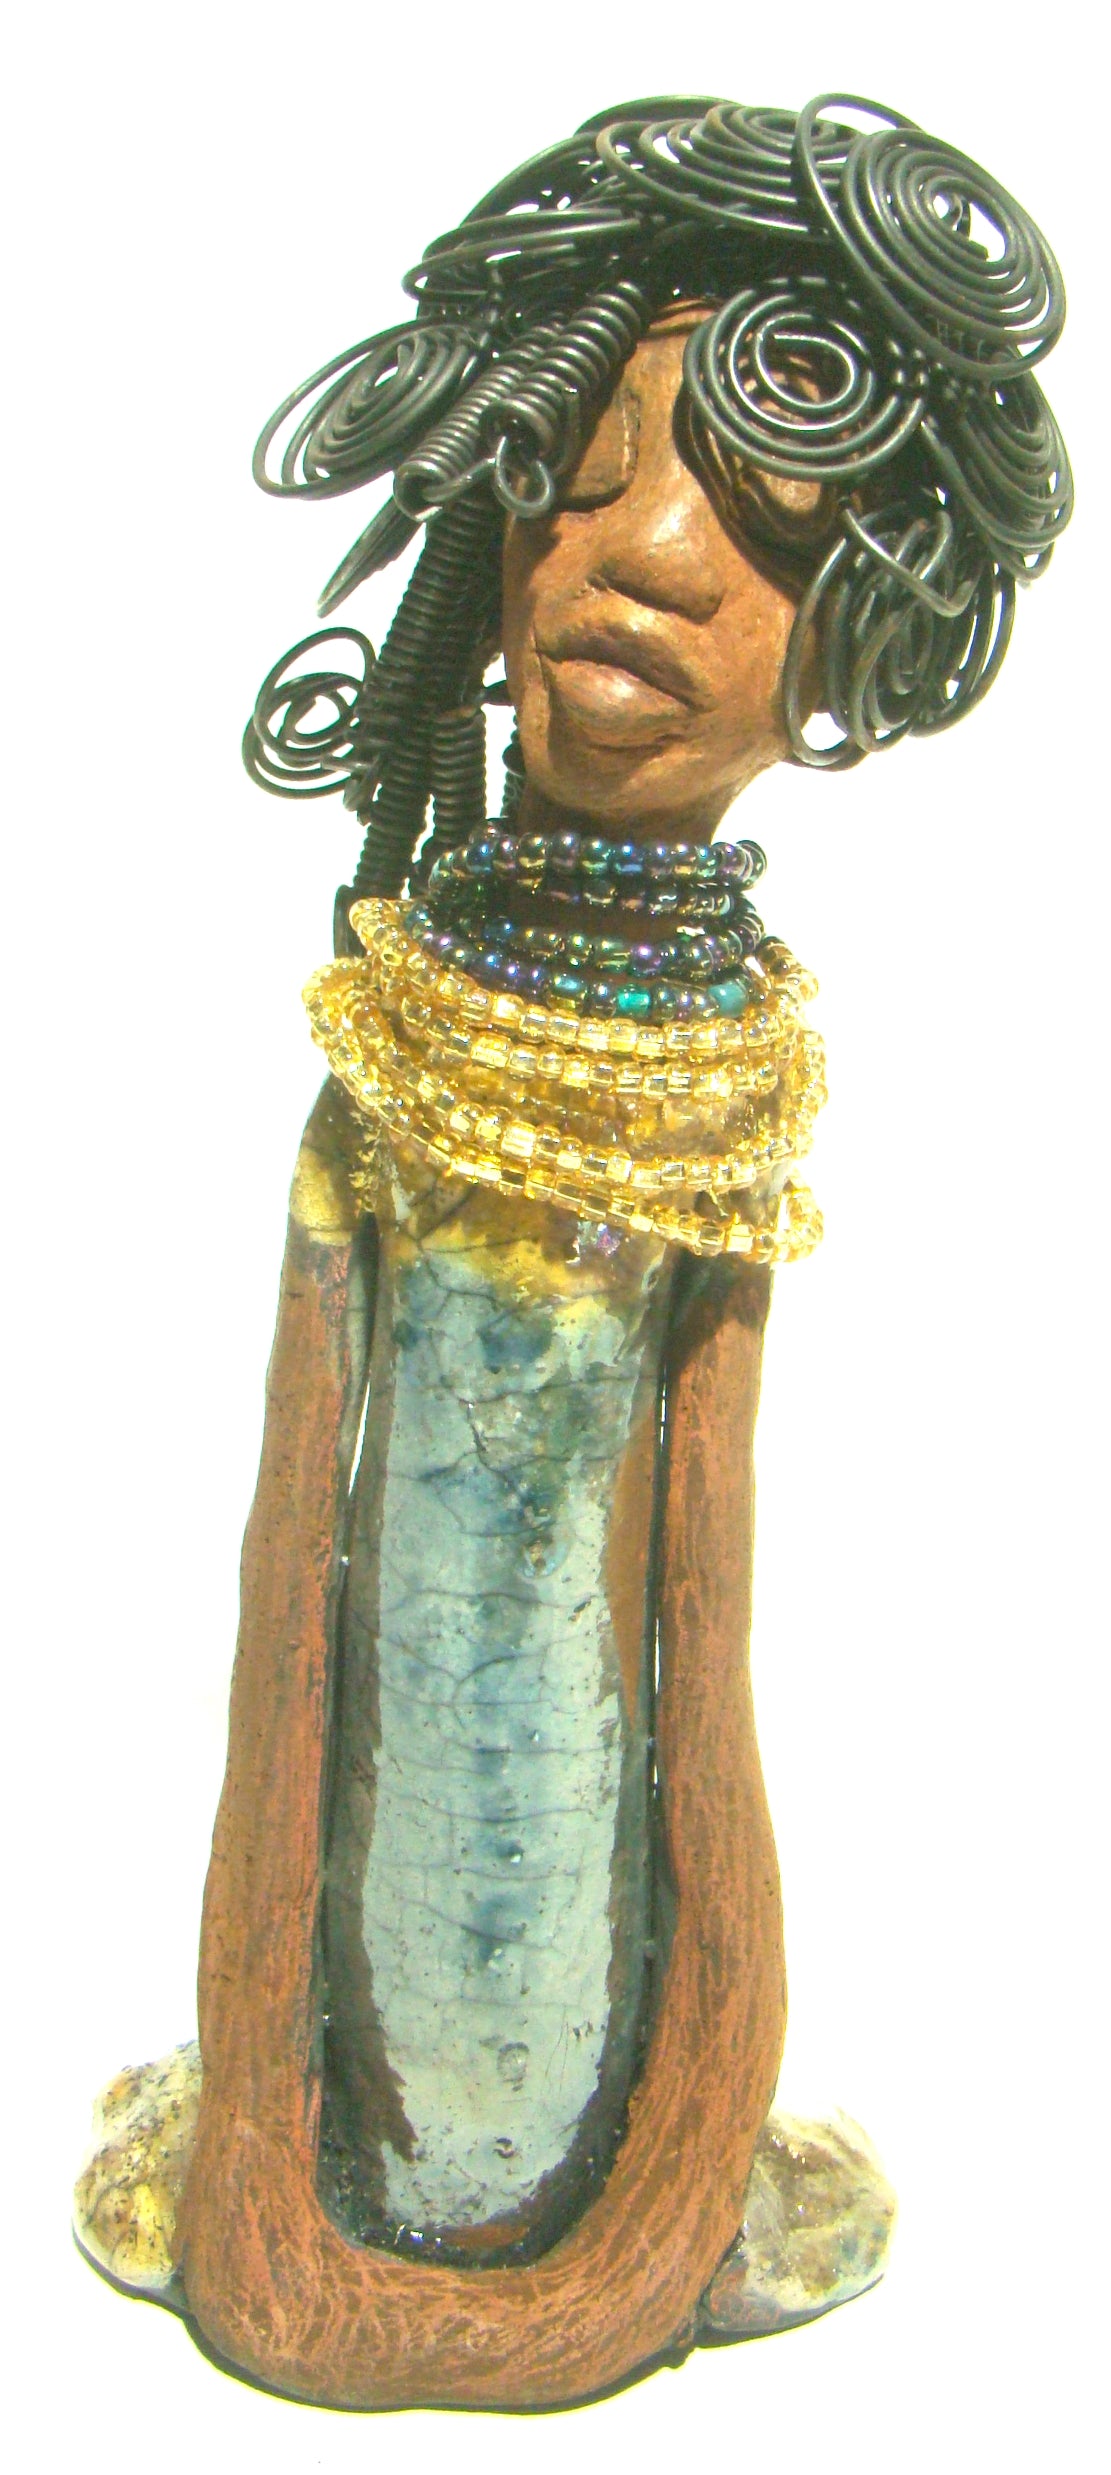 Sophia stands 10.5" x 4" x 3" and weighs 1.10 lbs. She has a  honey brown complexion with curls, coils and twisted, wire hair. Sophia wears a light blue crackle dress with a dazzling gold and multicolored beaded necklace.